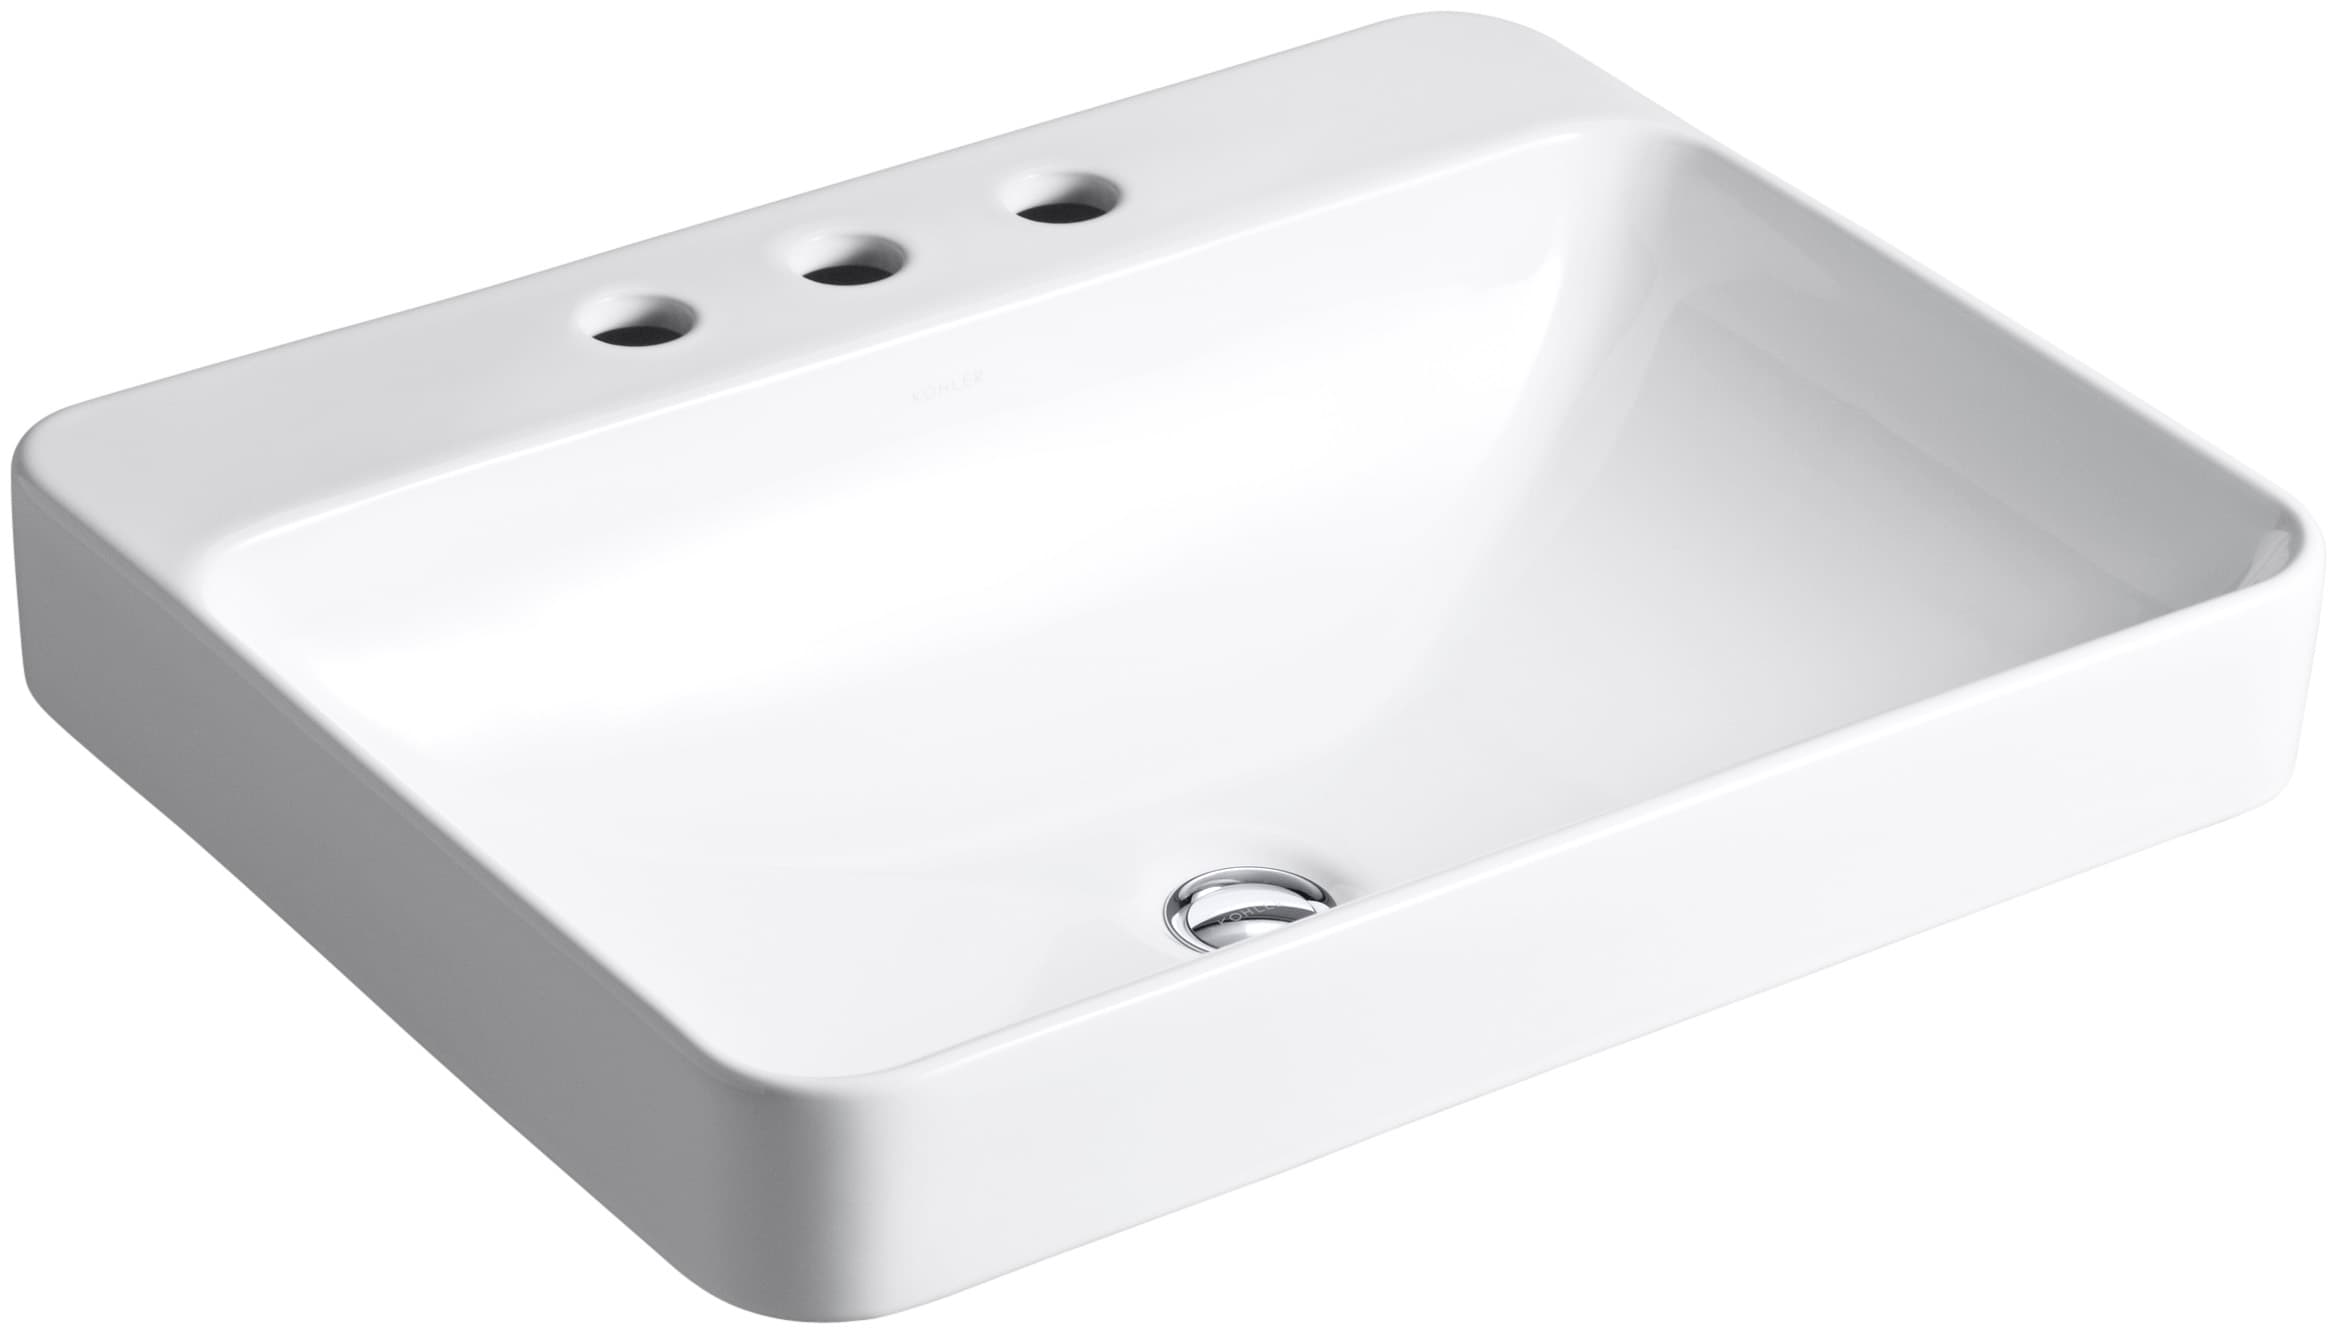 Bathroom Sink Topper Review: It's a Game-Changer for My